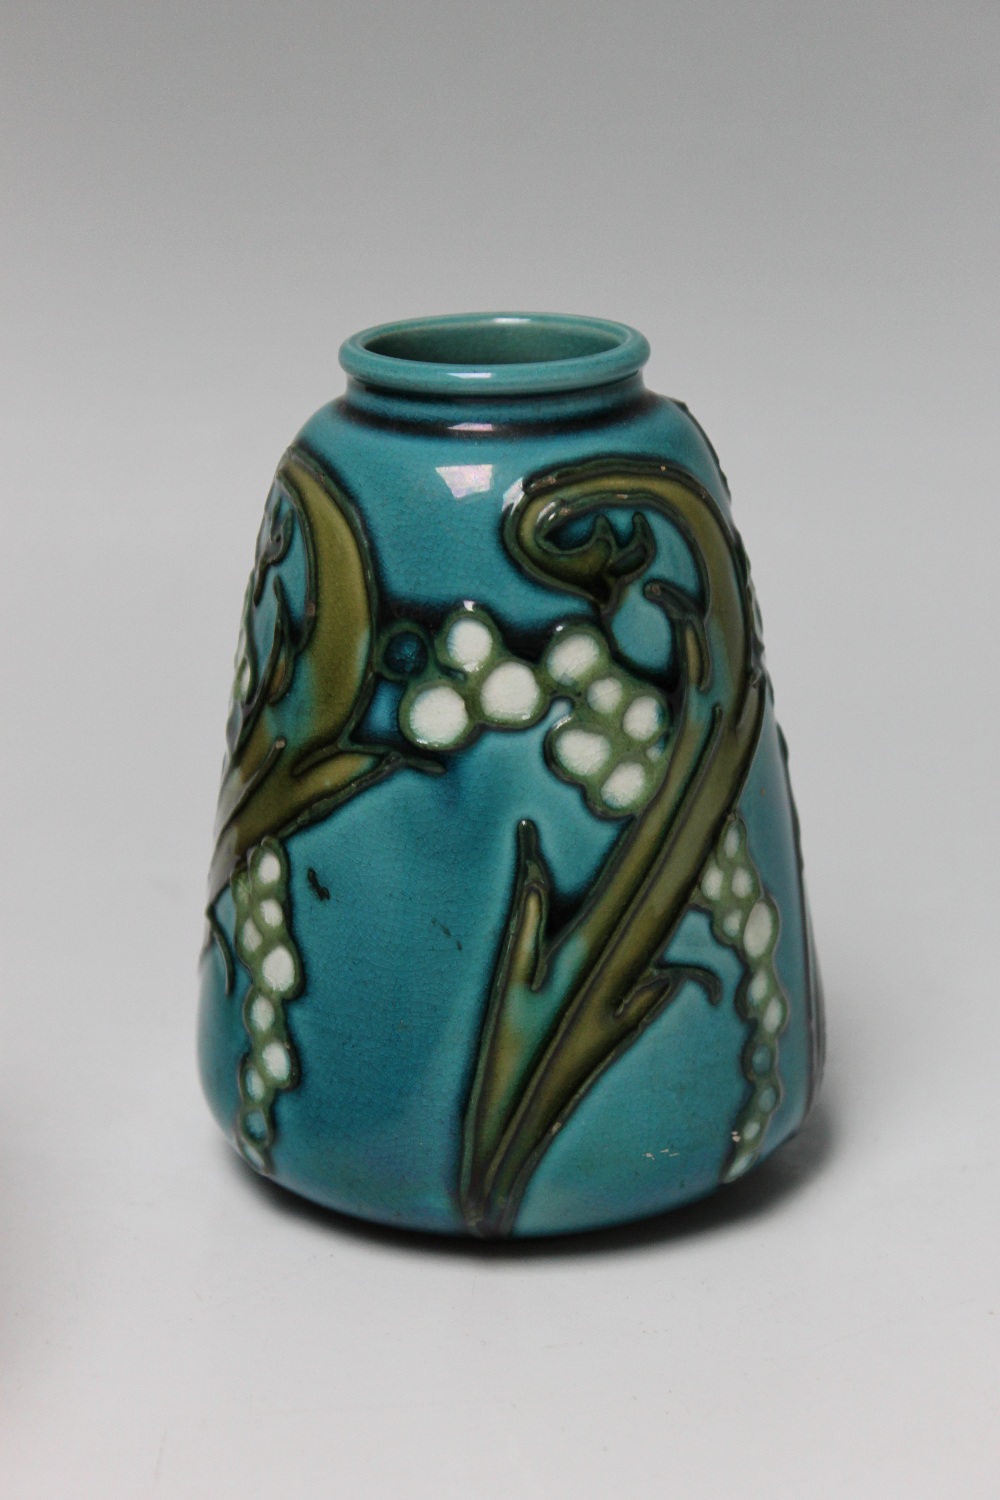 A MINTON LTD SECESSIONIST VASE No 5, turquoise ground with tubelined decoration, H 10.5 cm - Image 2 of 3